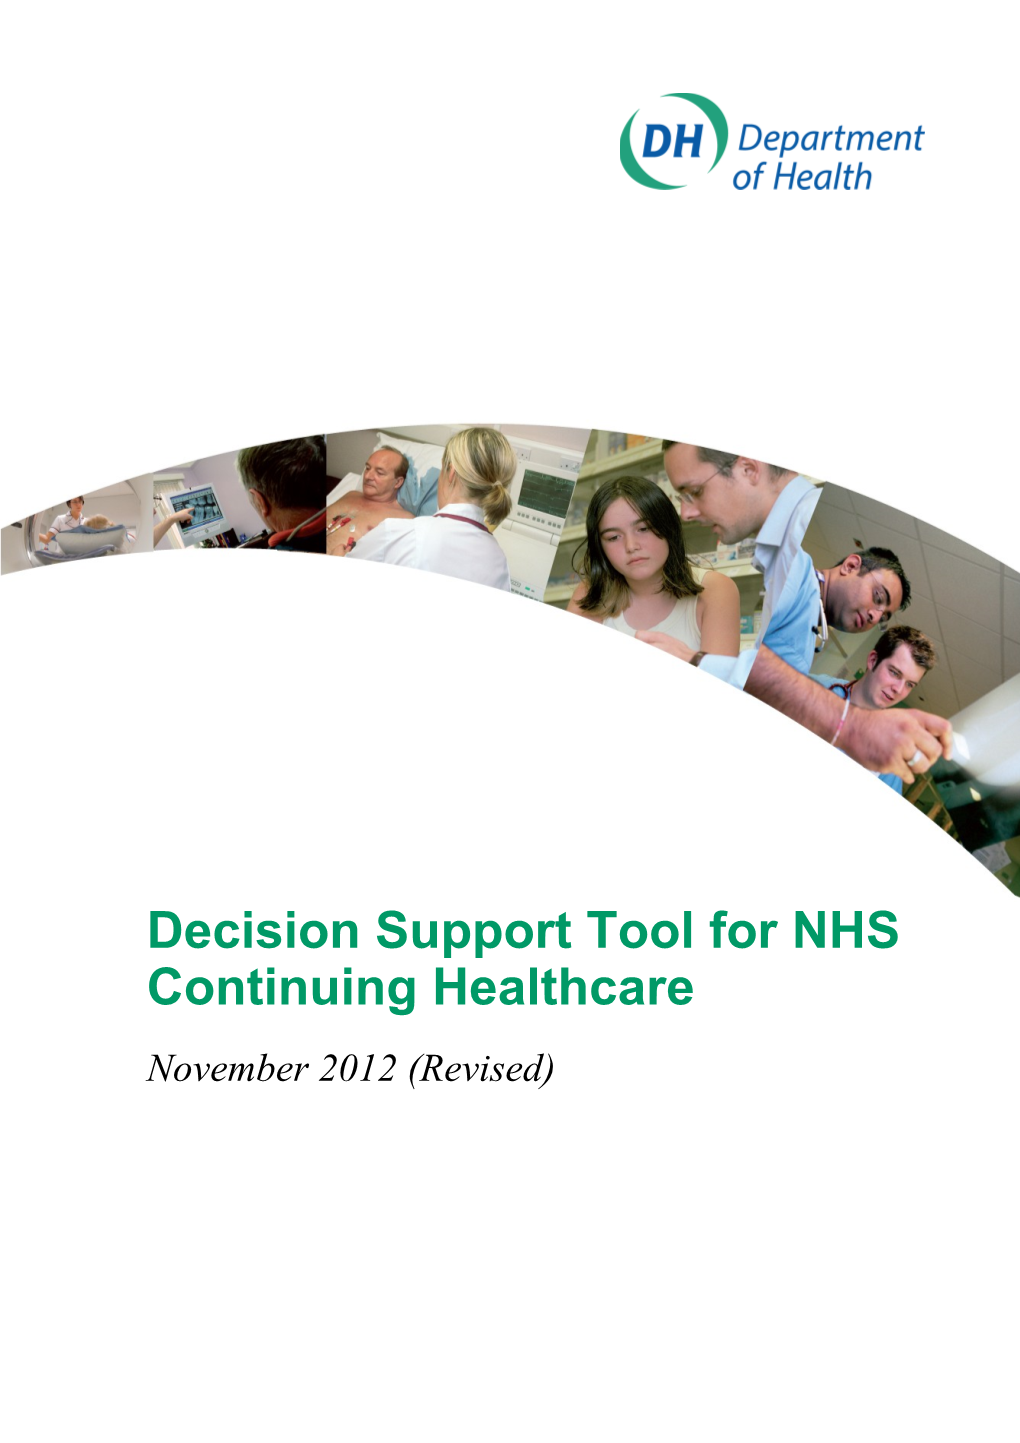 Decision Support Tool for NHS Continuing Healthcare